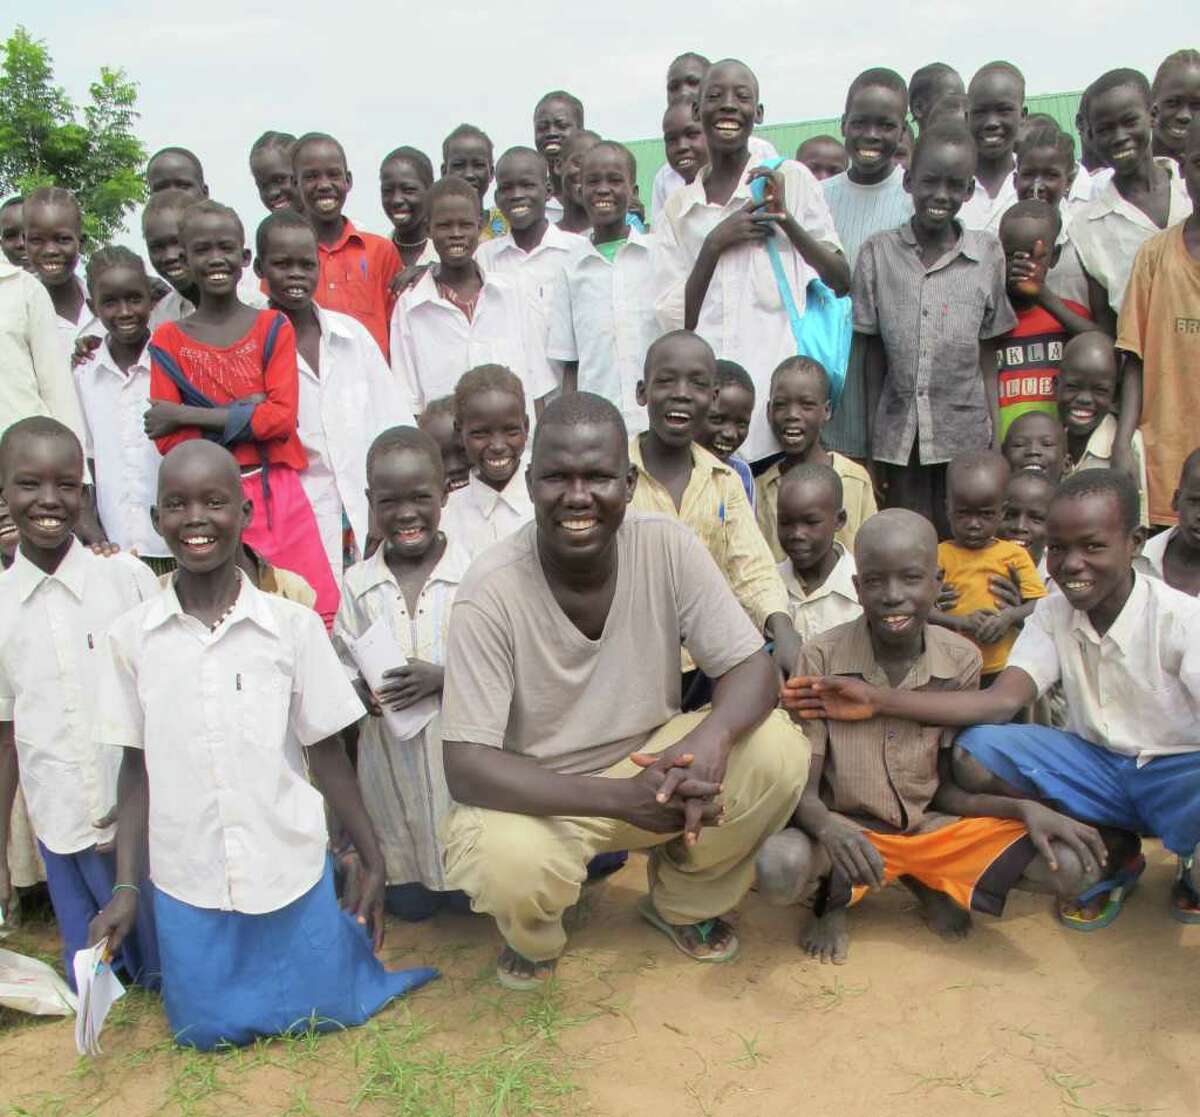 Gabriel Bol Deng, center, founder and director of the nonprofit foundation Hope for Ariang, spends time with some of the children who are benefiting from a new school that is being constructed in the village of Ariang, in Southern Sudan, Africa, through the fundraising efforts of his foundation. An art show that will raises funds for educational initiatives for the women of the village is set for Sunday, Nov. 27, at the Fairfield Arts Center in Fairfield. For more information, visit thesudancanvasproject.org.